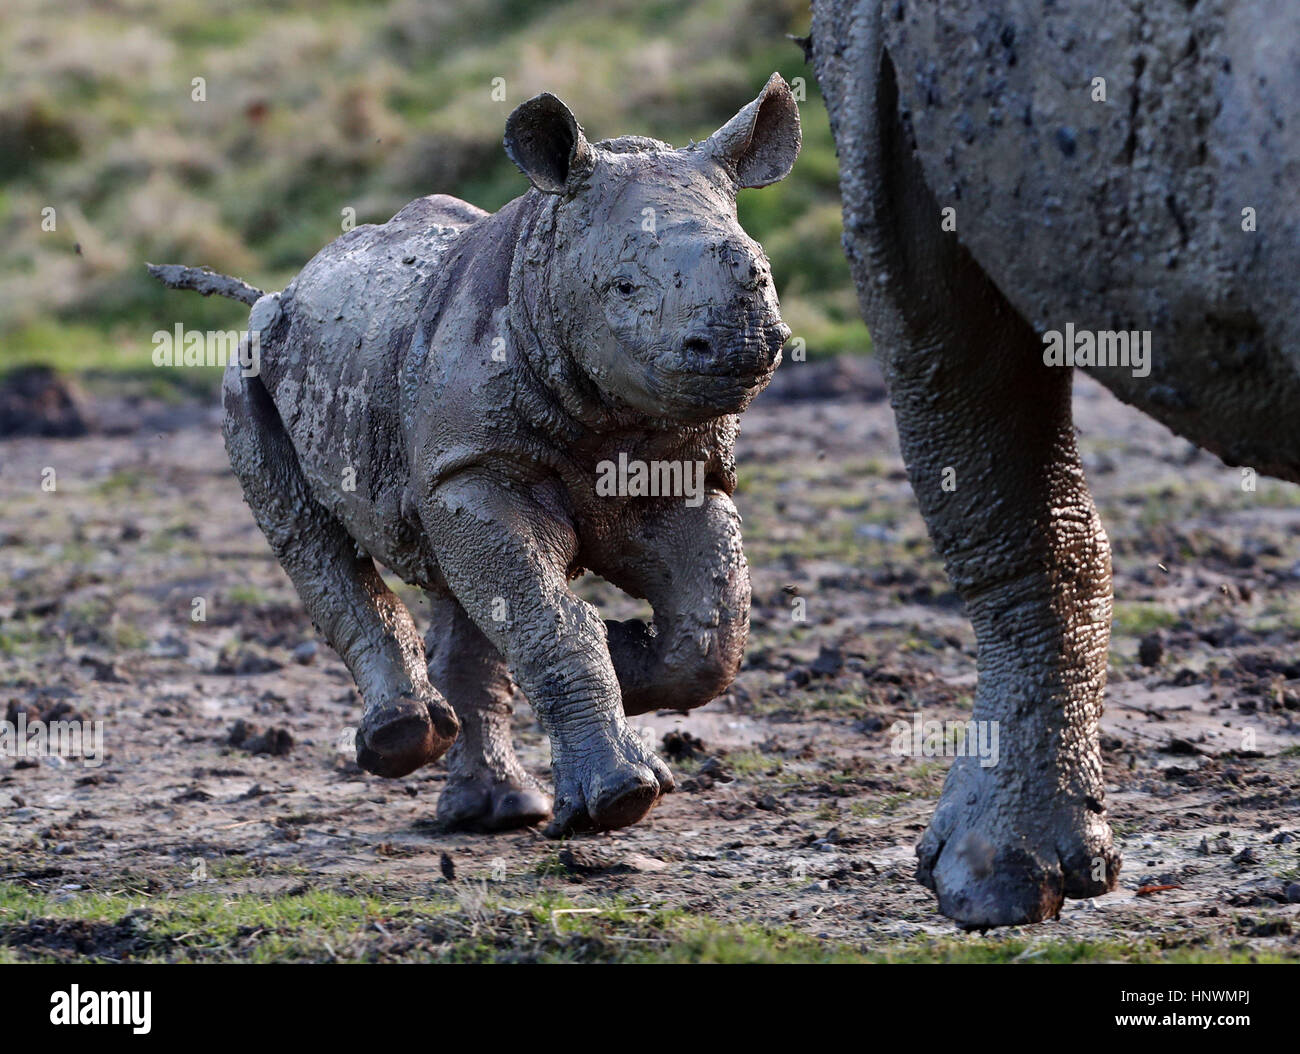 Rukuru, a baby rhino born December 2016 explores her enclosure after taking a mud bath at Port Lympne Reserve with her mother Nyasa after spending the last month keeping warm with her mother in their indoor enclosures. Stock Photo